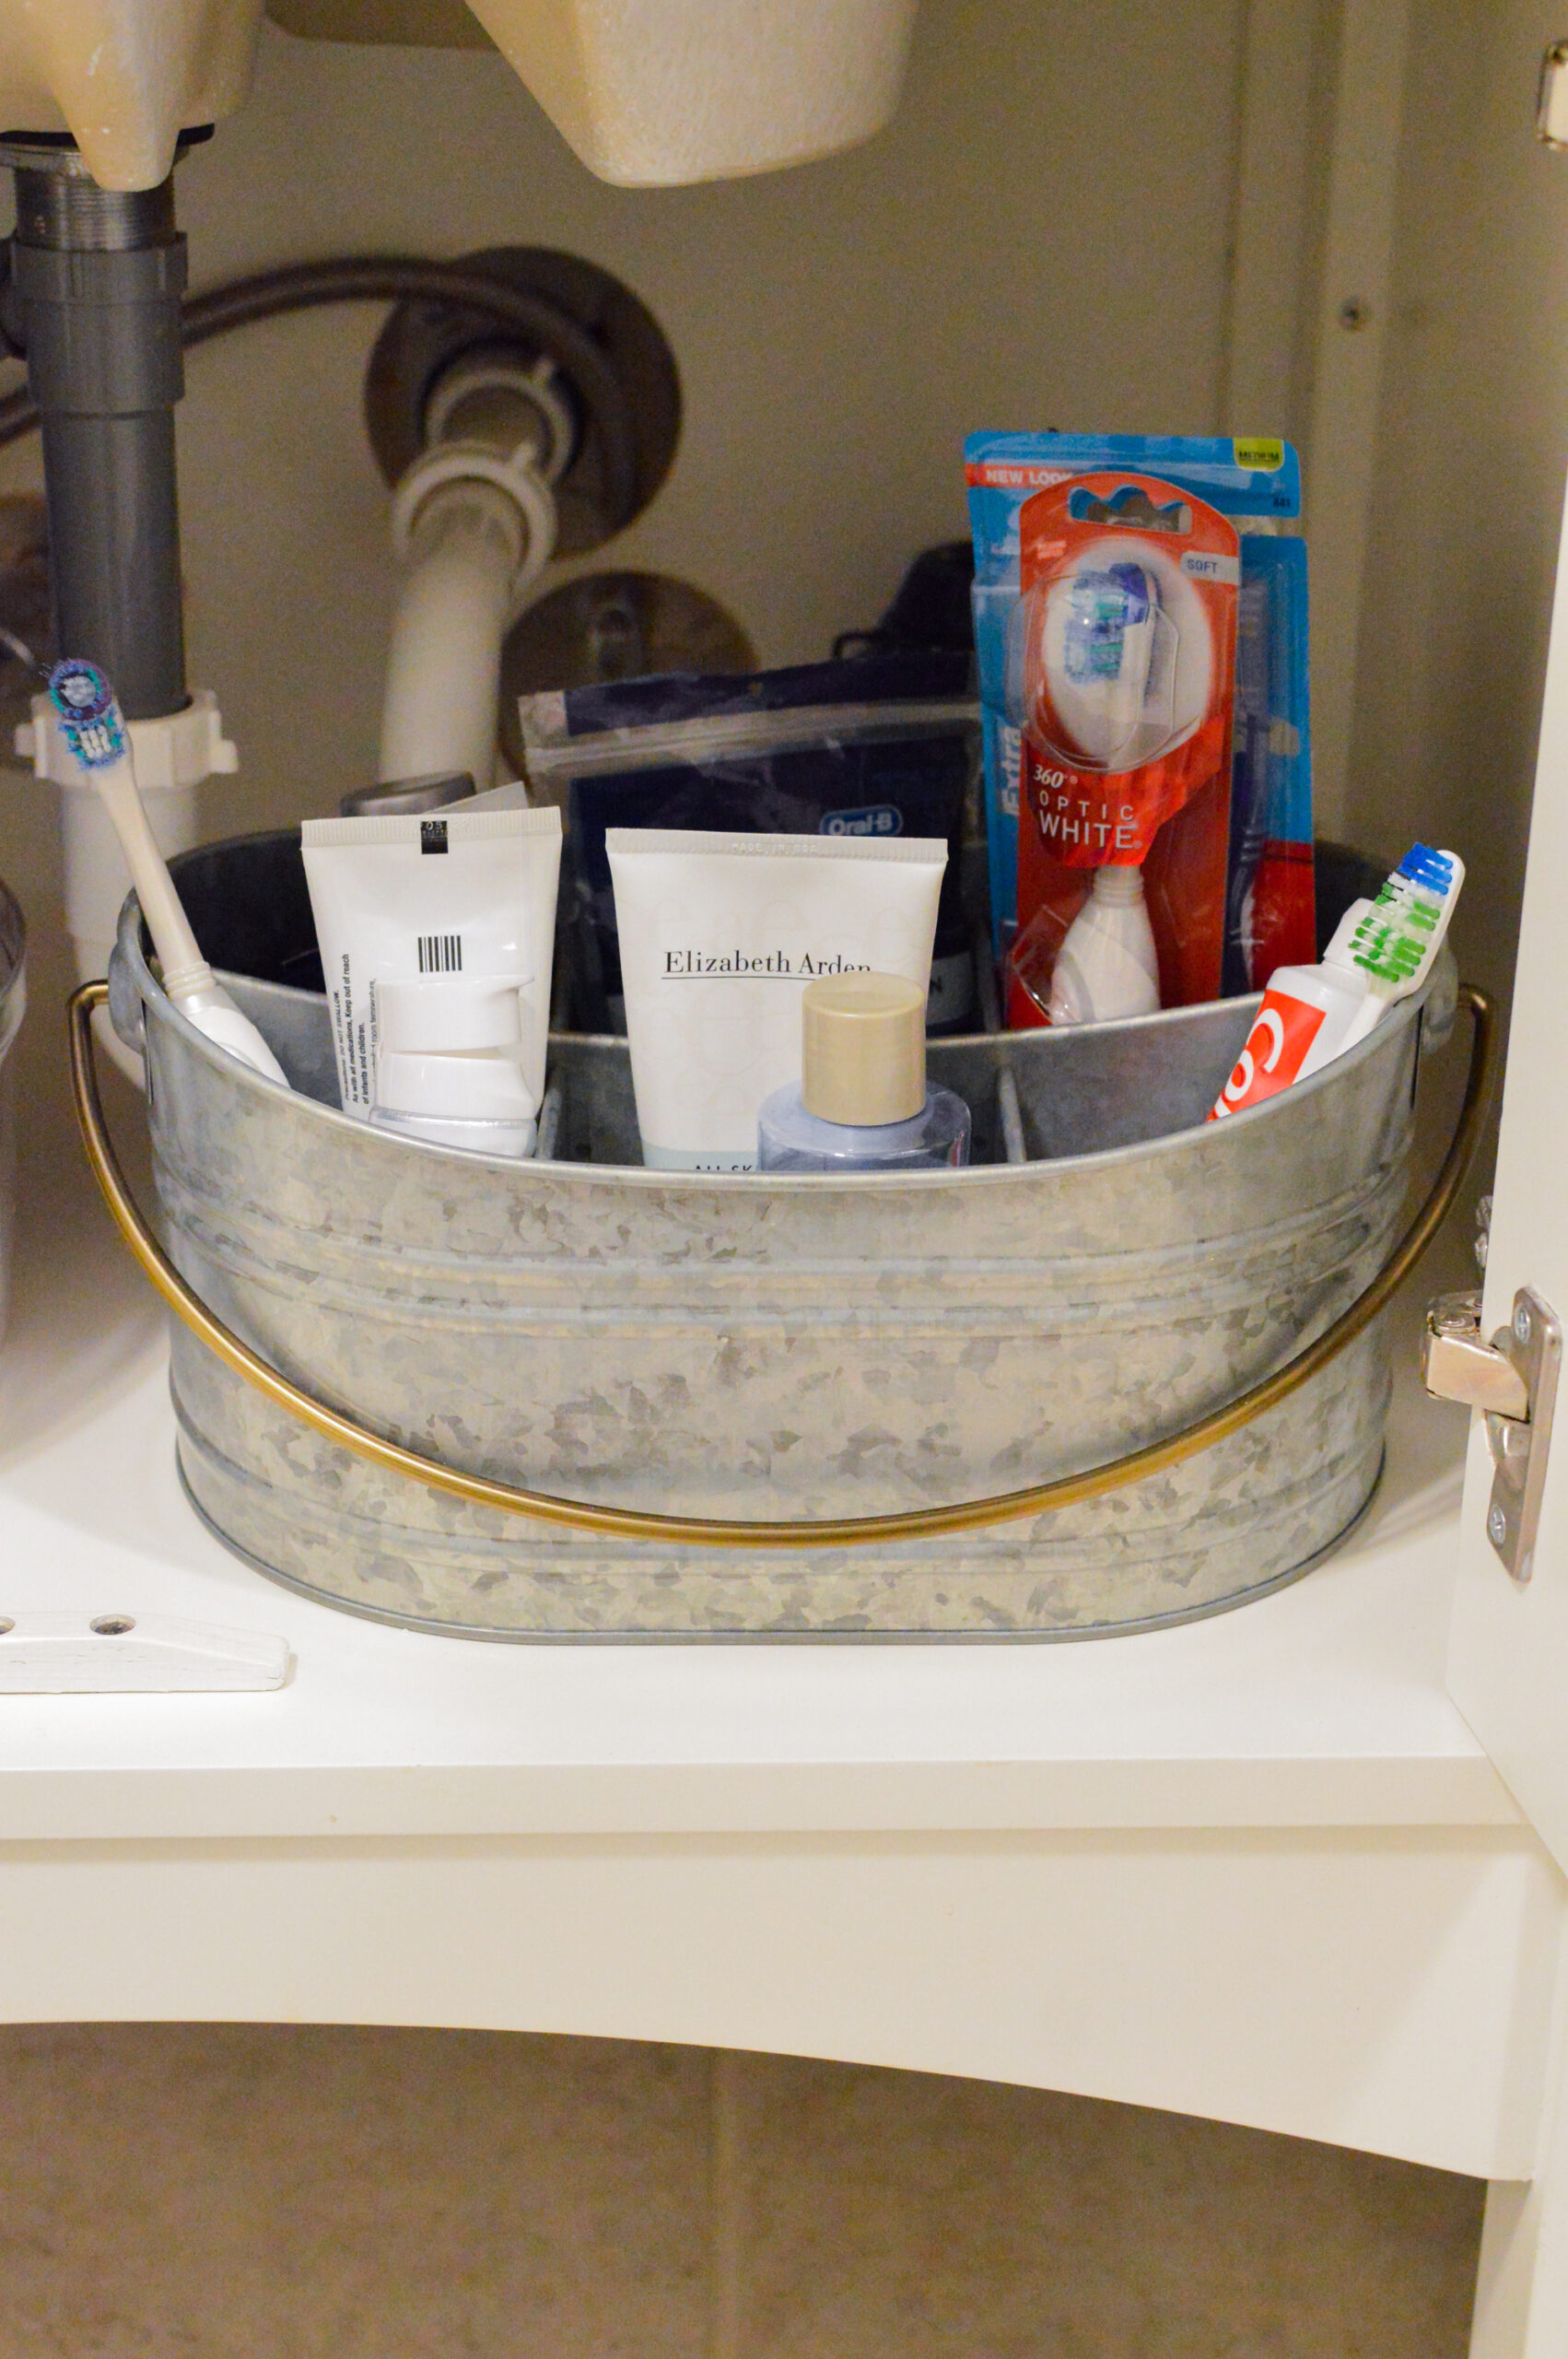 How To Organize Under The Bathroom Sink - Small Stuff Counts